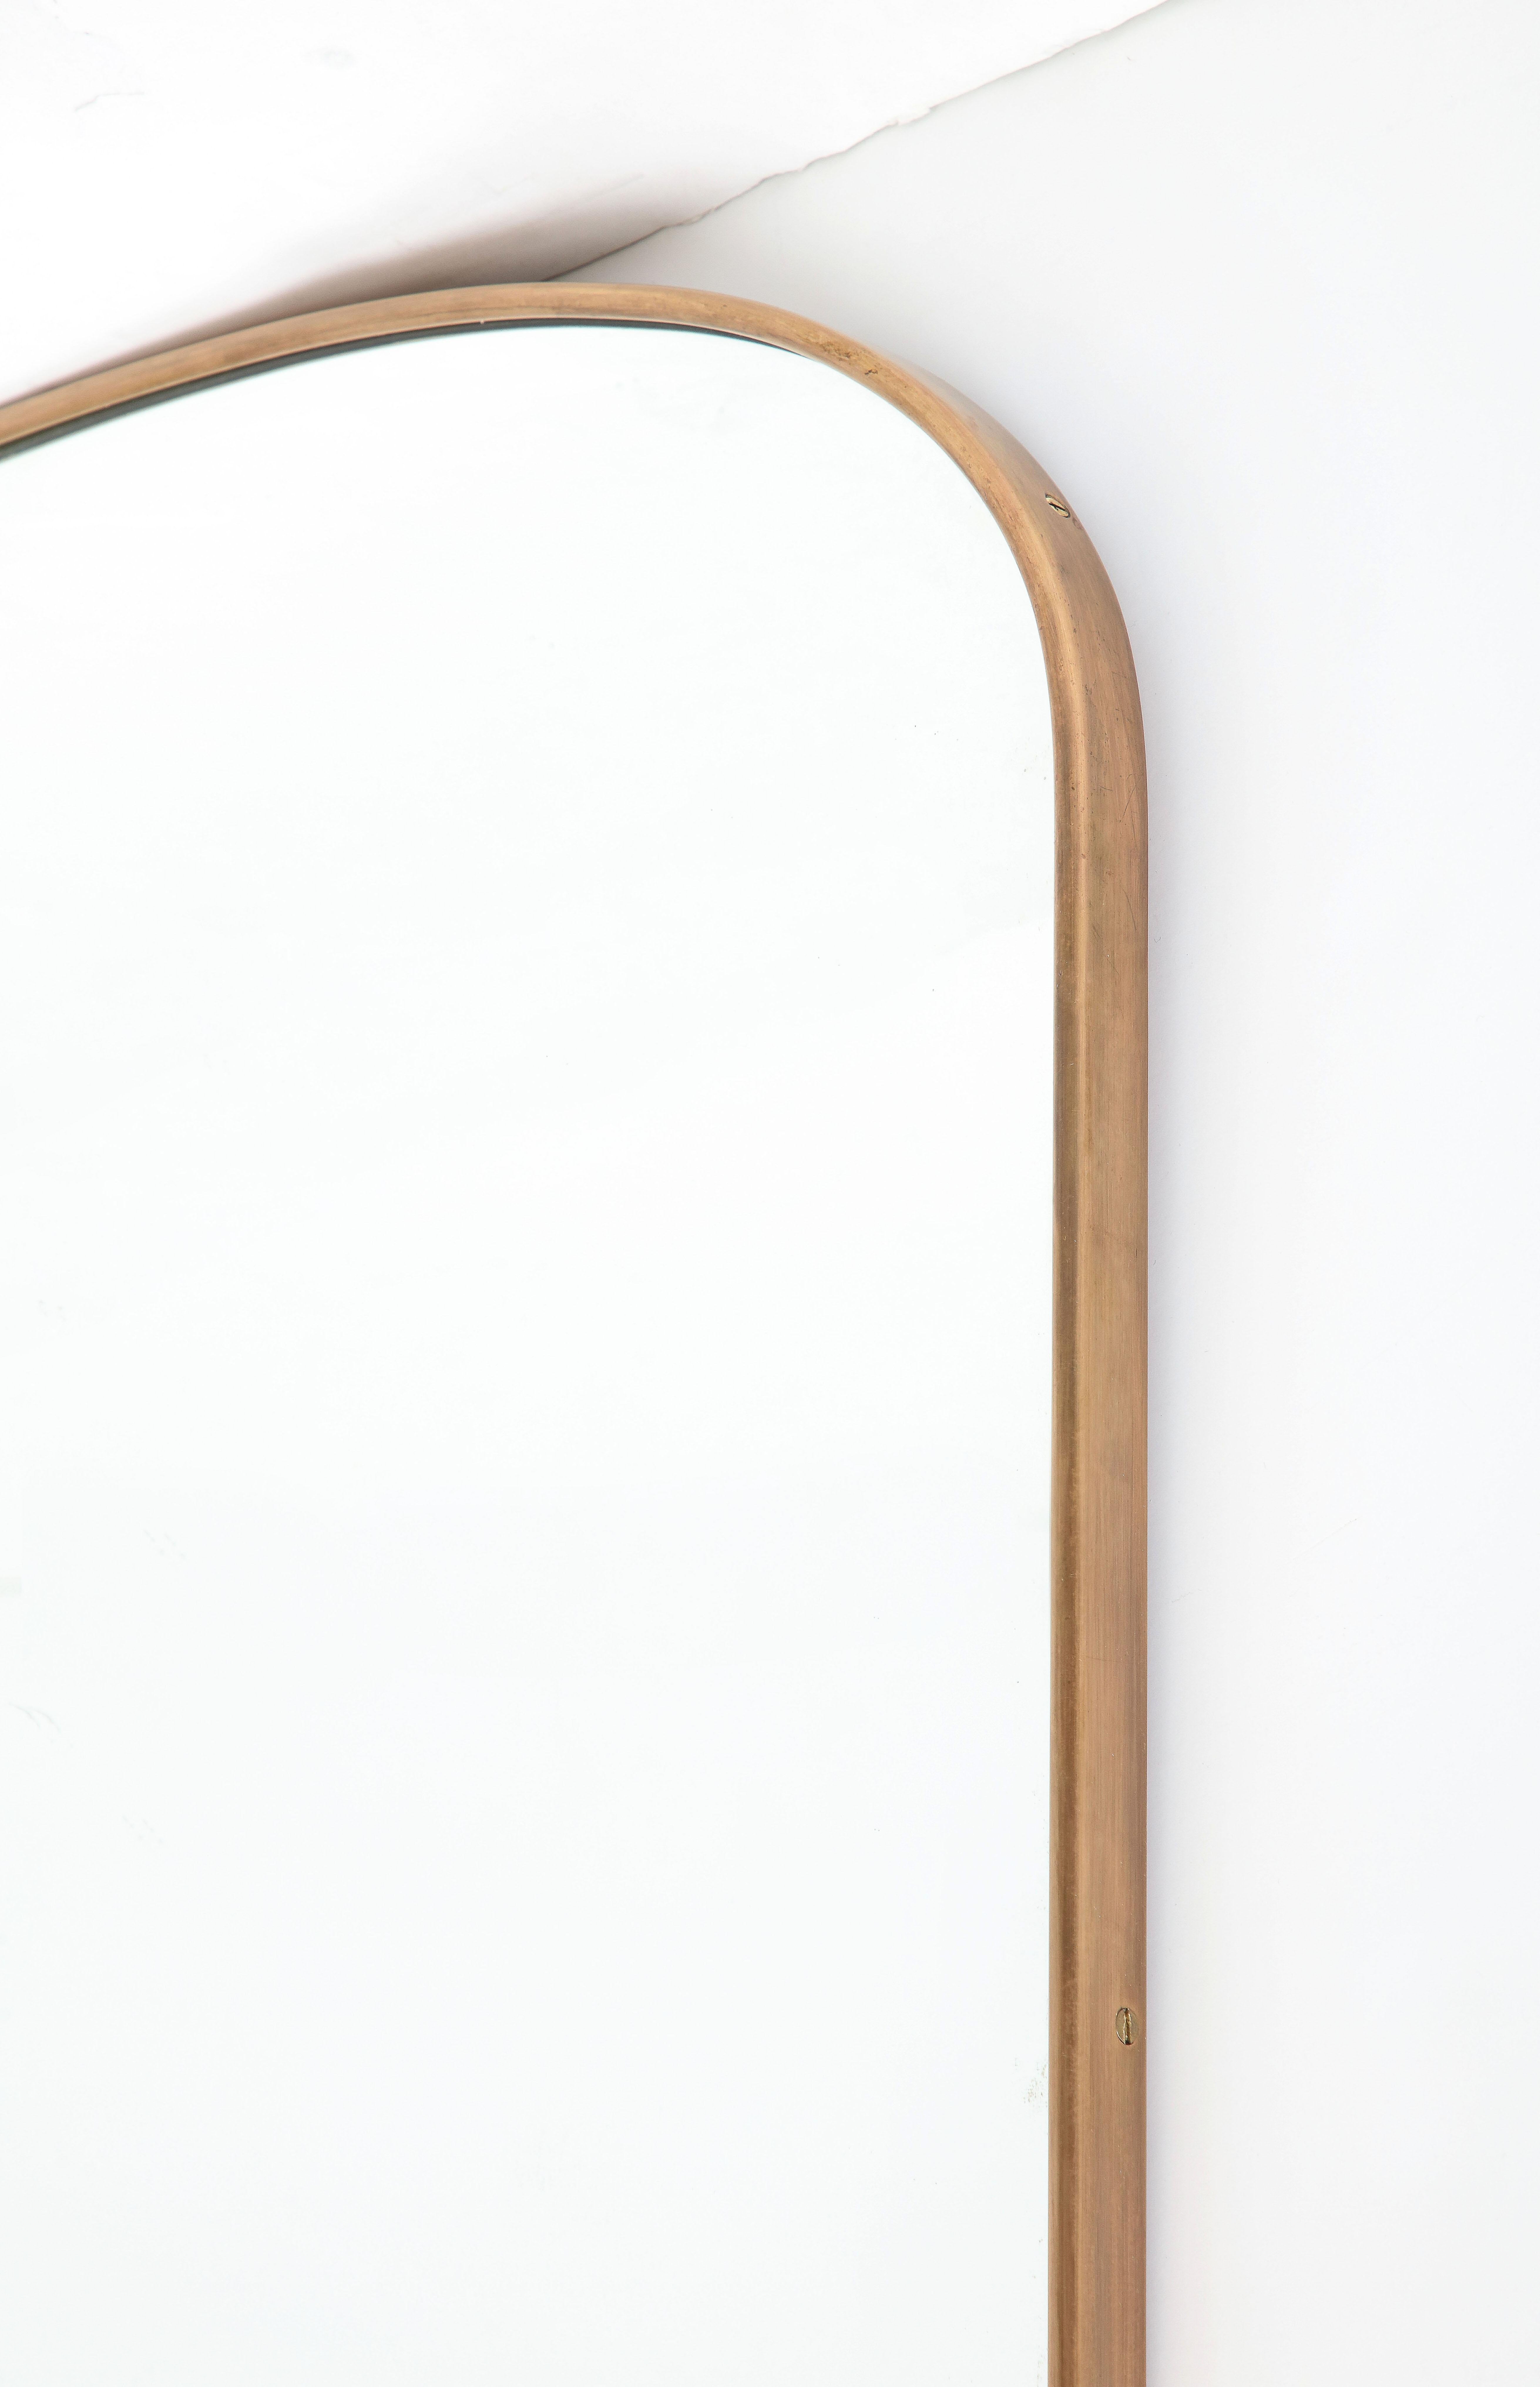 Mid-20th Century 1950s Italian Modernist Large Shaped Brass Mirror For Sale